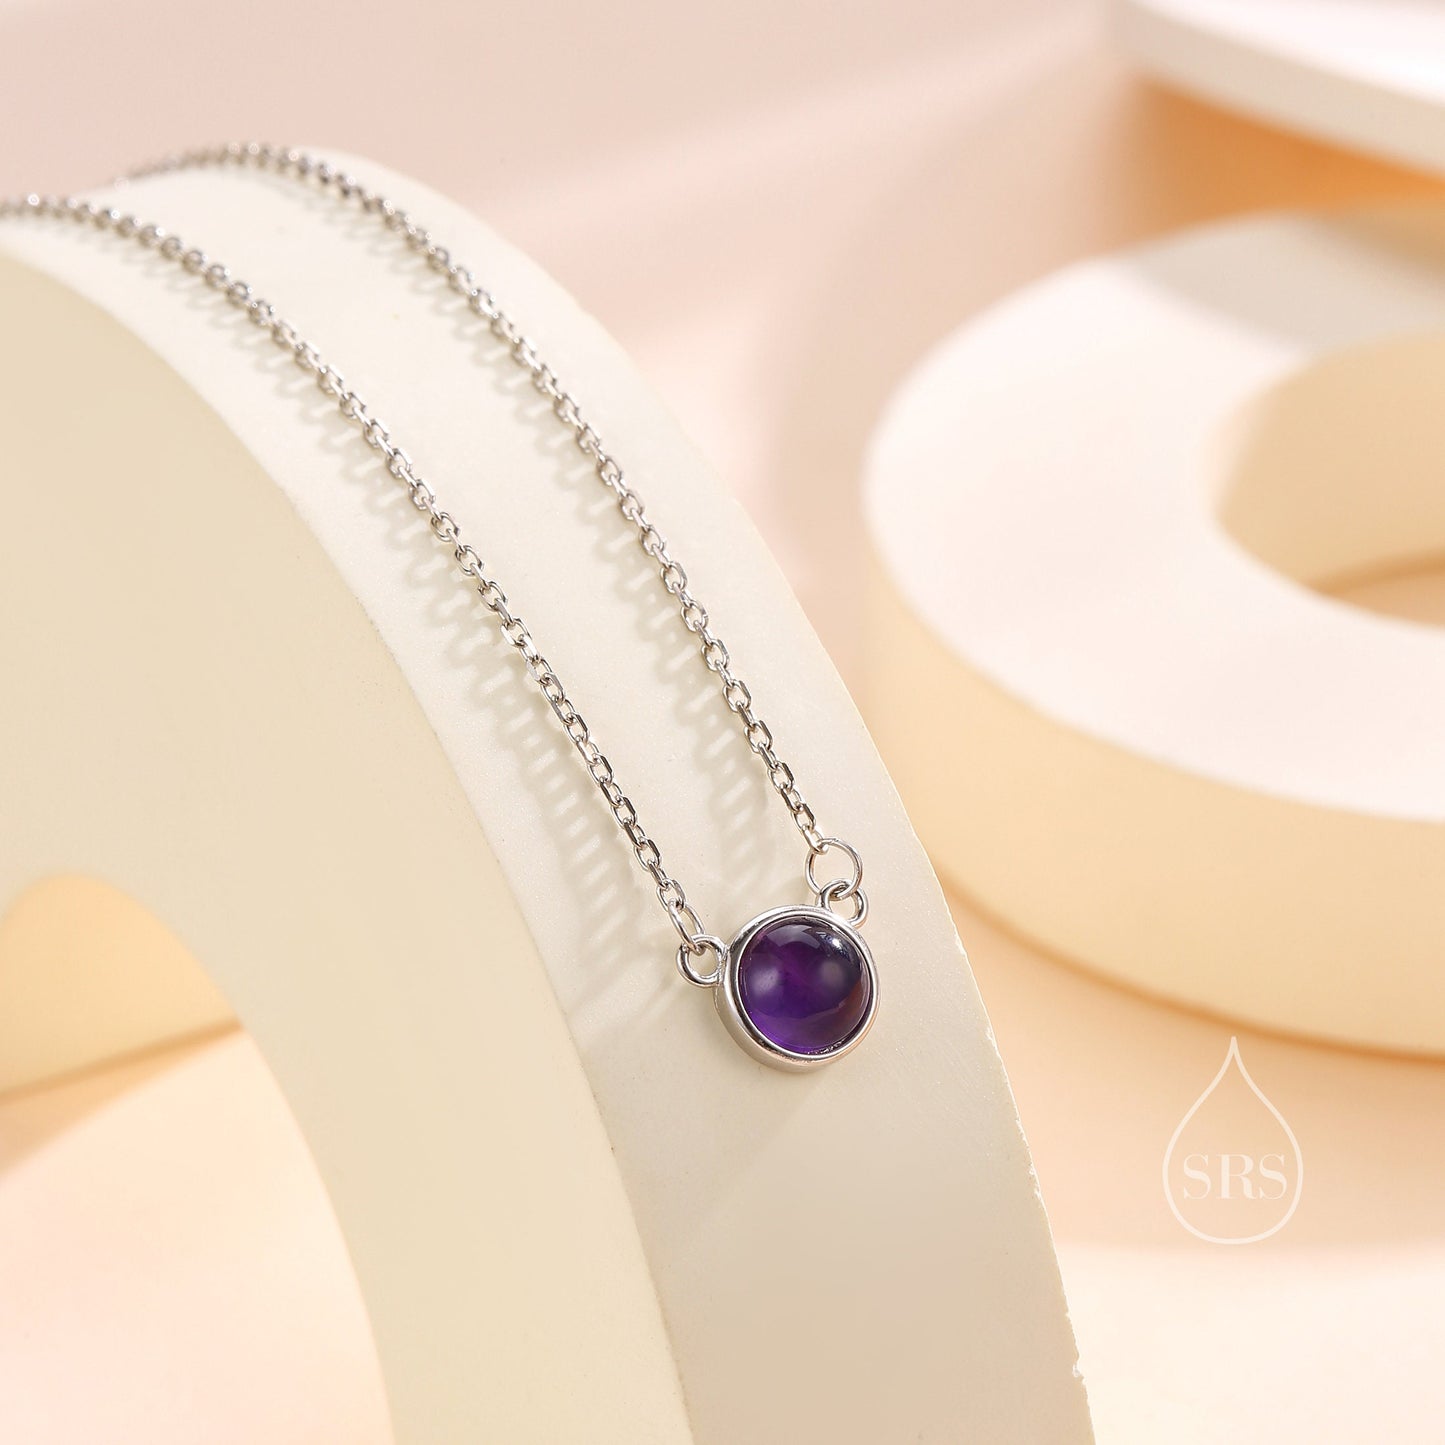 Sterling Silver Genuine Purple Amethyst Dainty Coin Pendant Necklace - Delicate Purple Amethyst Stone Coin Necklace, February Birthstone